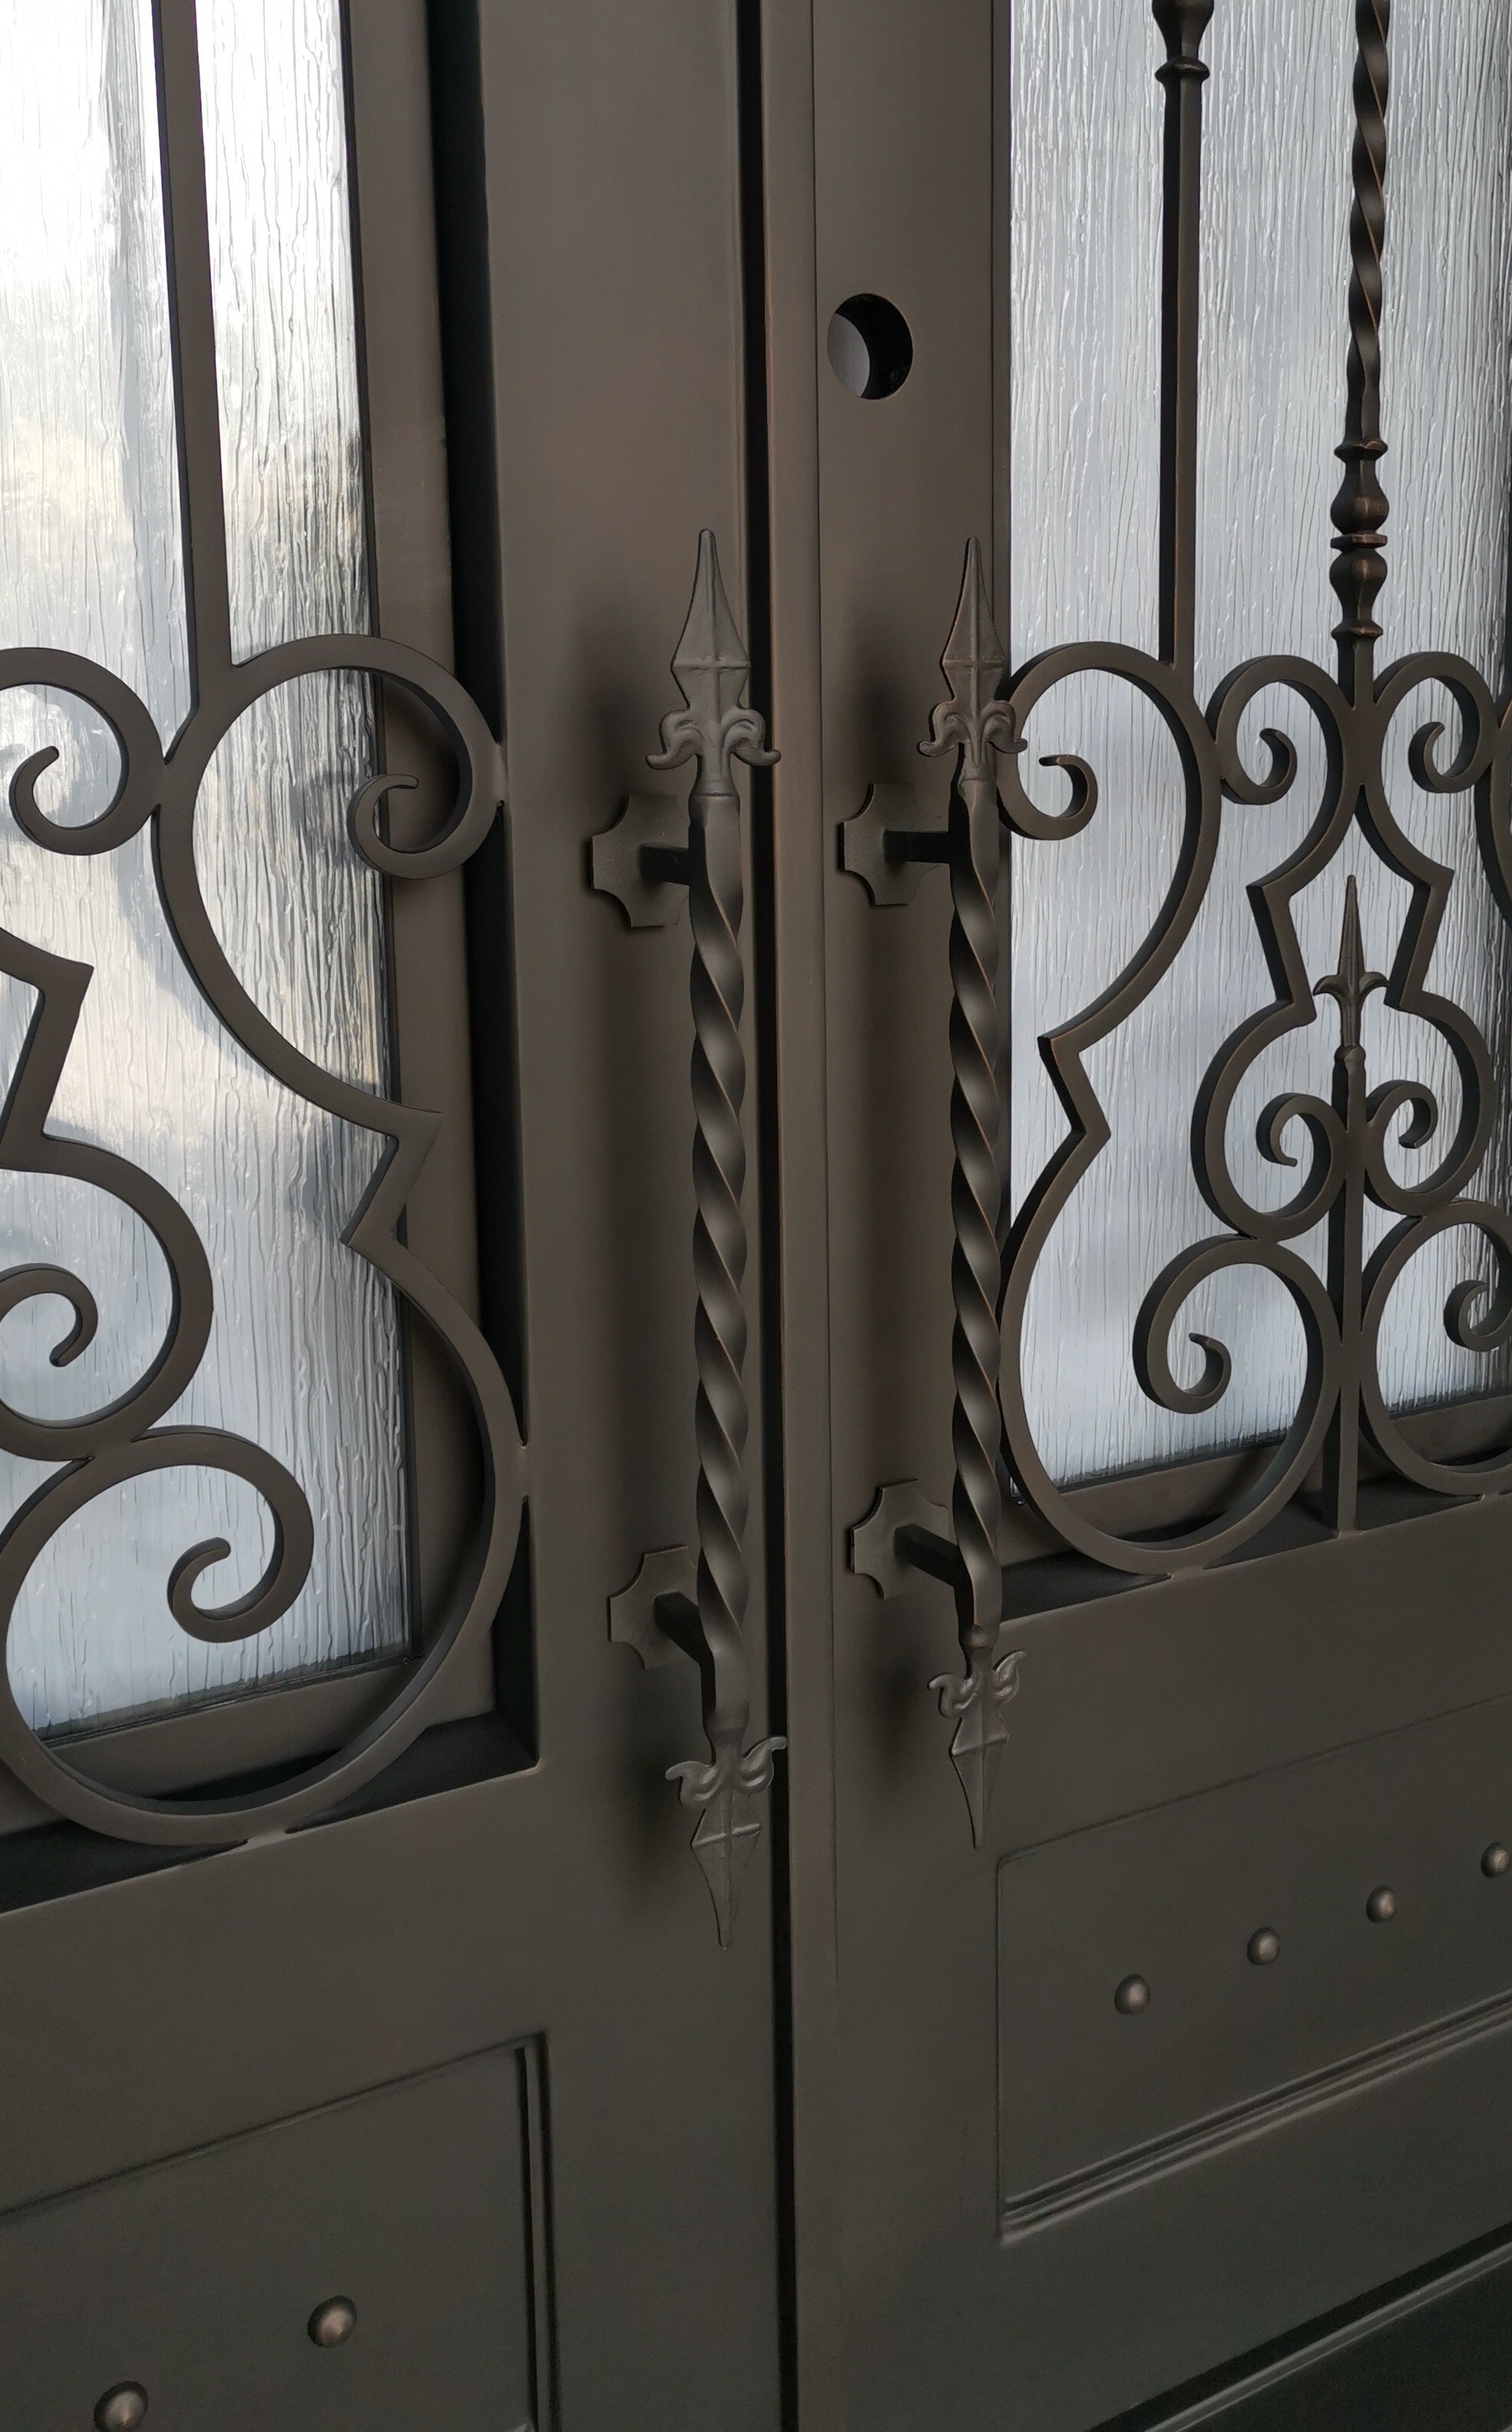 Addison Model Double Front Entry Iron Door With Tempered Rain Glass Dark Bronze Finish - AAWAIZ IMPORTS